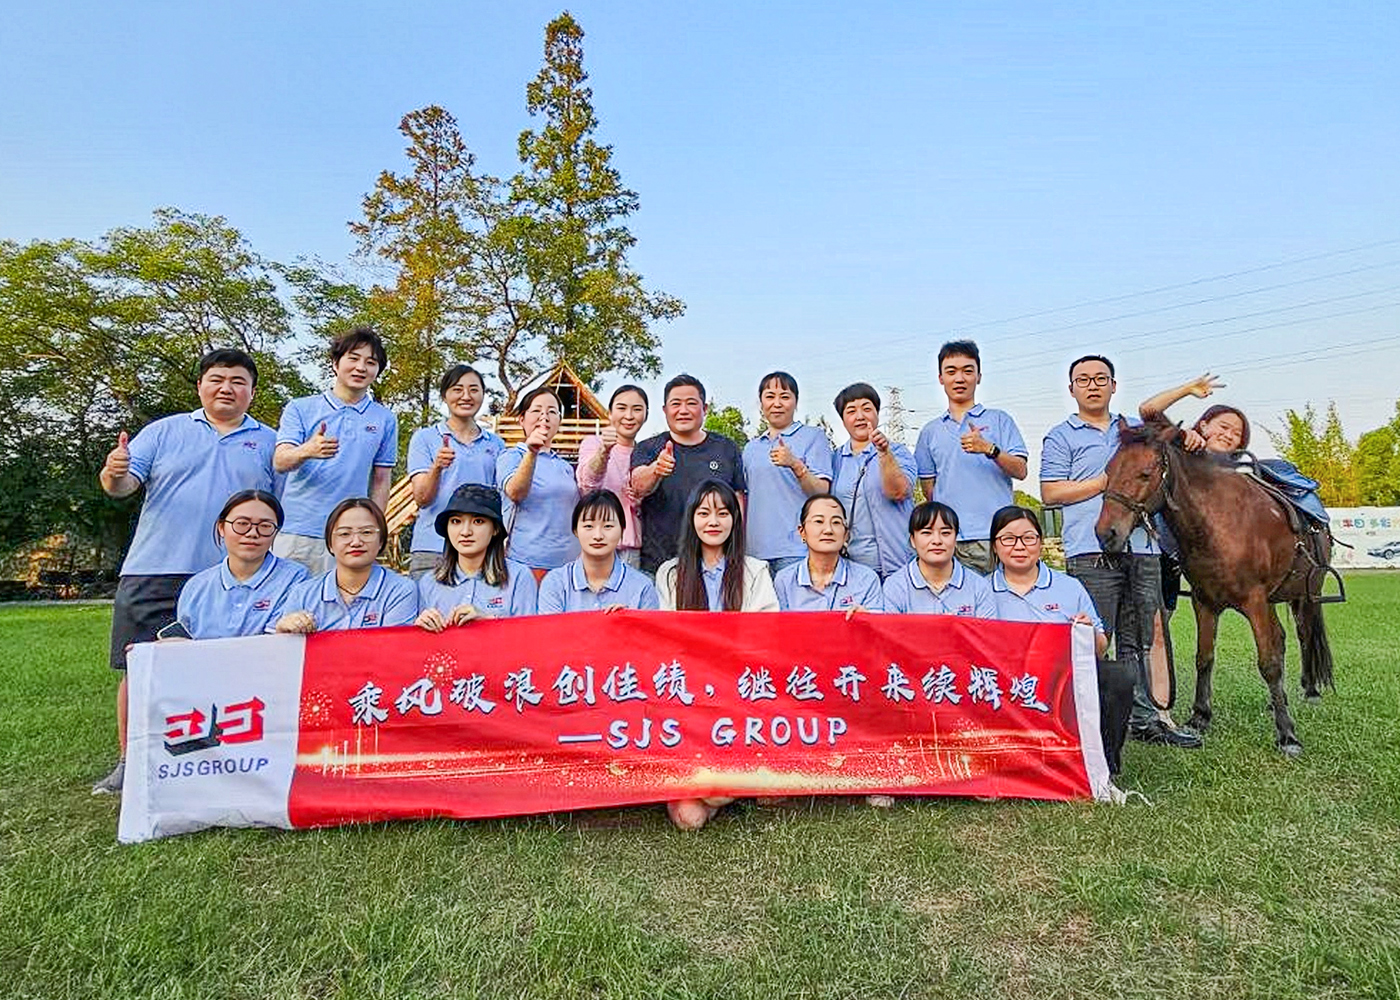 Company news-September 9 SJS Wiping Rag Company Group Building Activity - Outdoor Barbecue